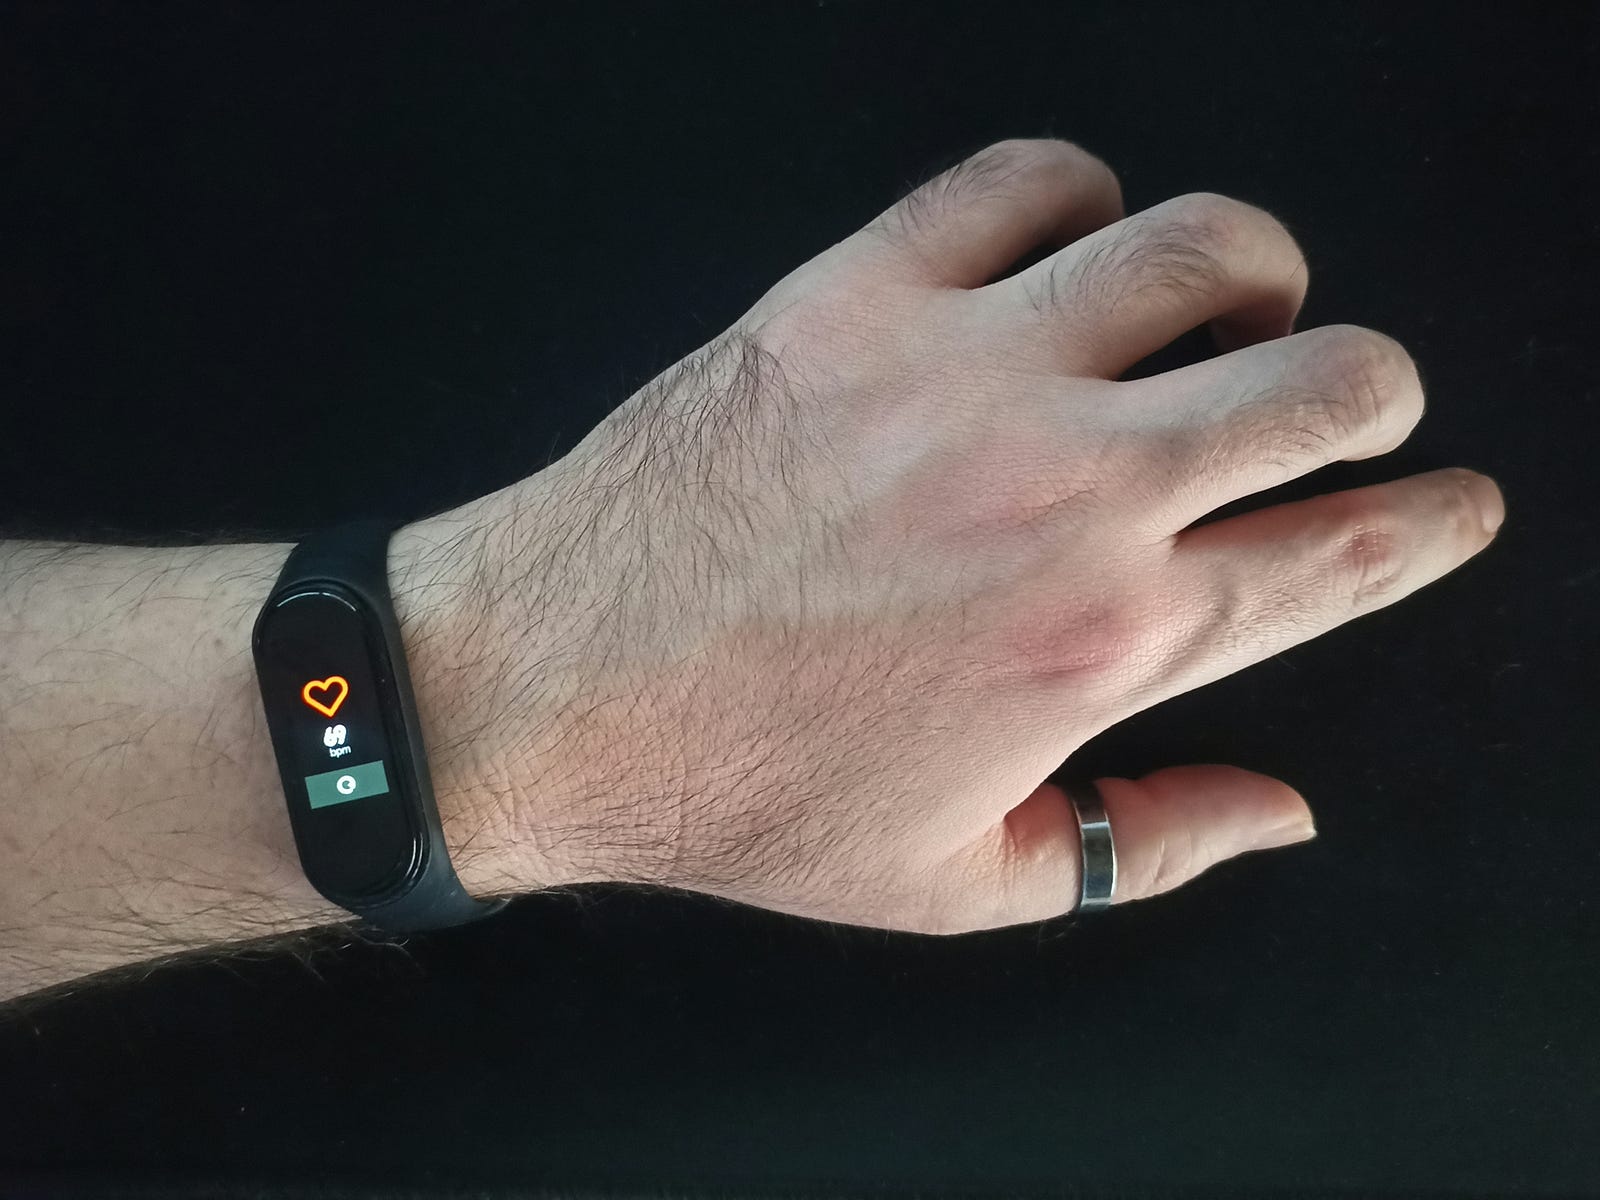 A wrist device (Fitbit) measuring a person’s pulse (heart rate).